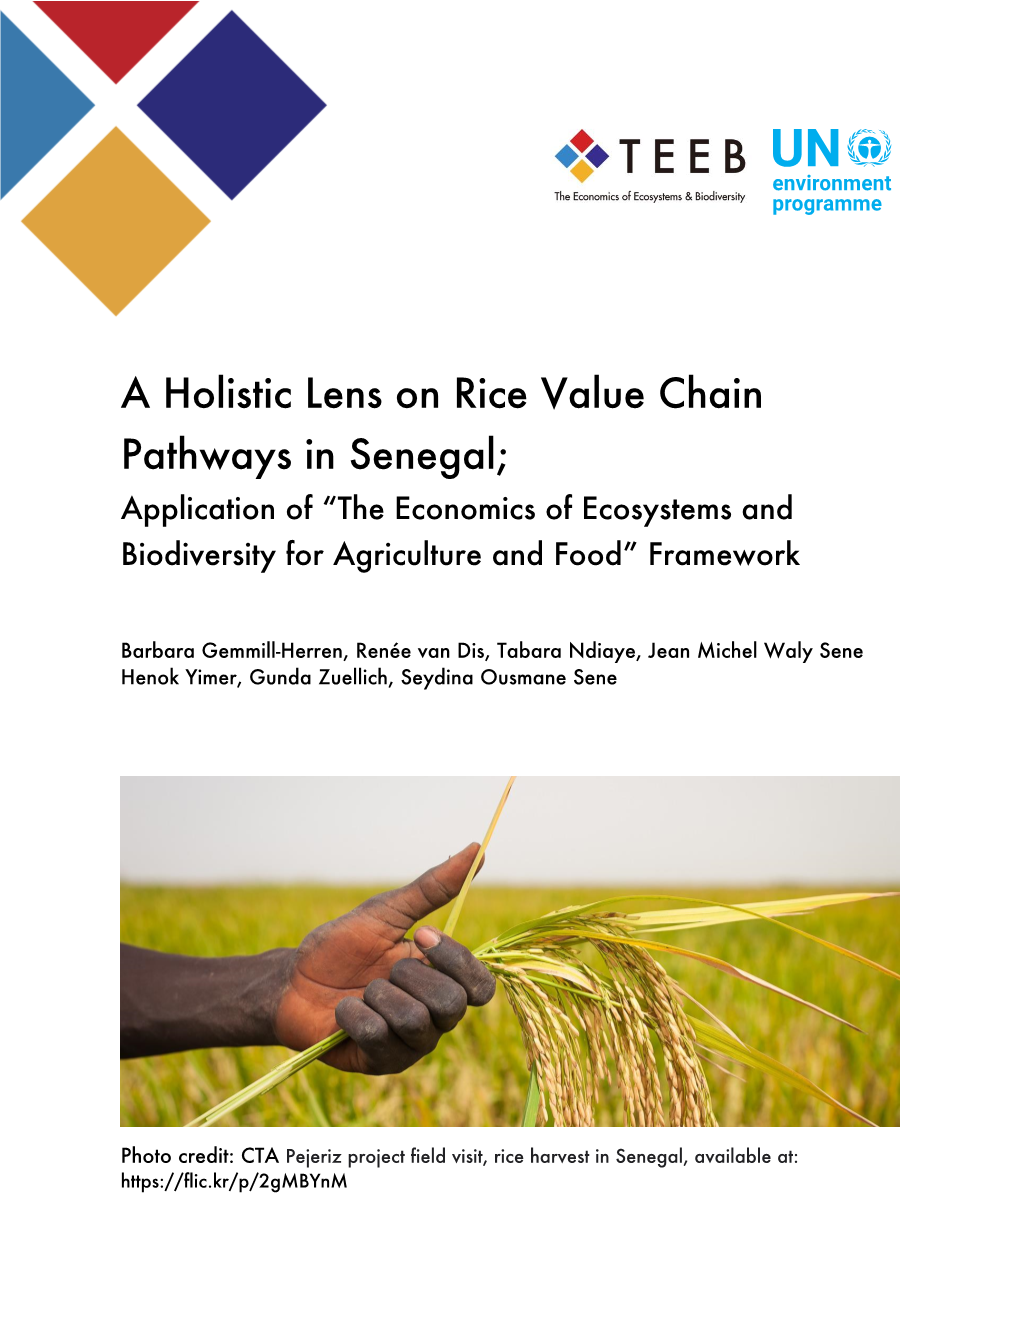 A Holistic Lens on Rice Value Chain Pathways in Senegal; Application of “The Economics of Ecosystems And